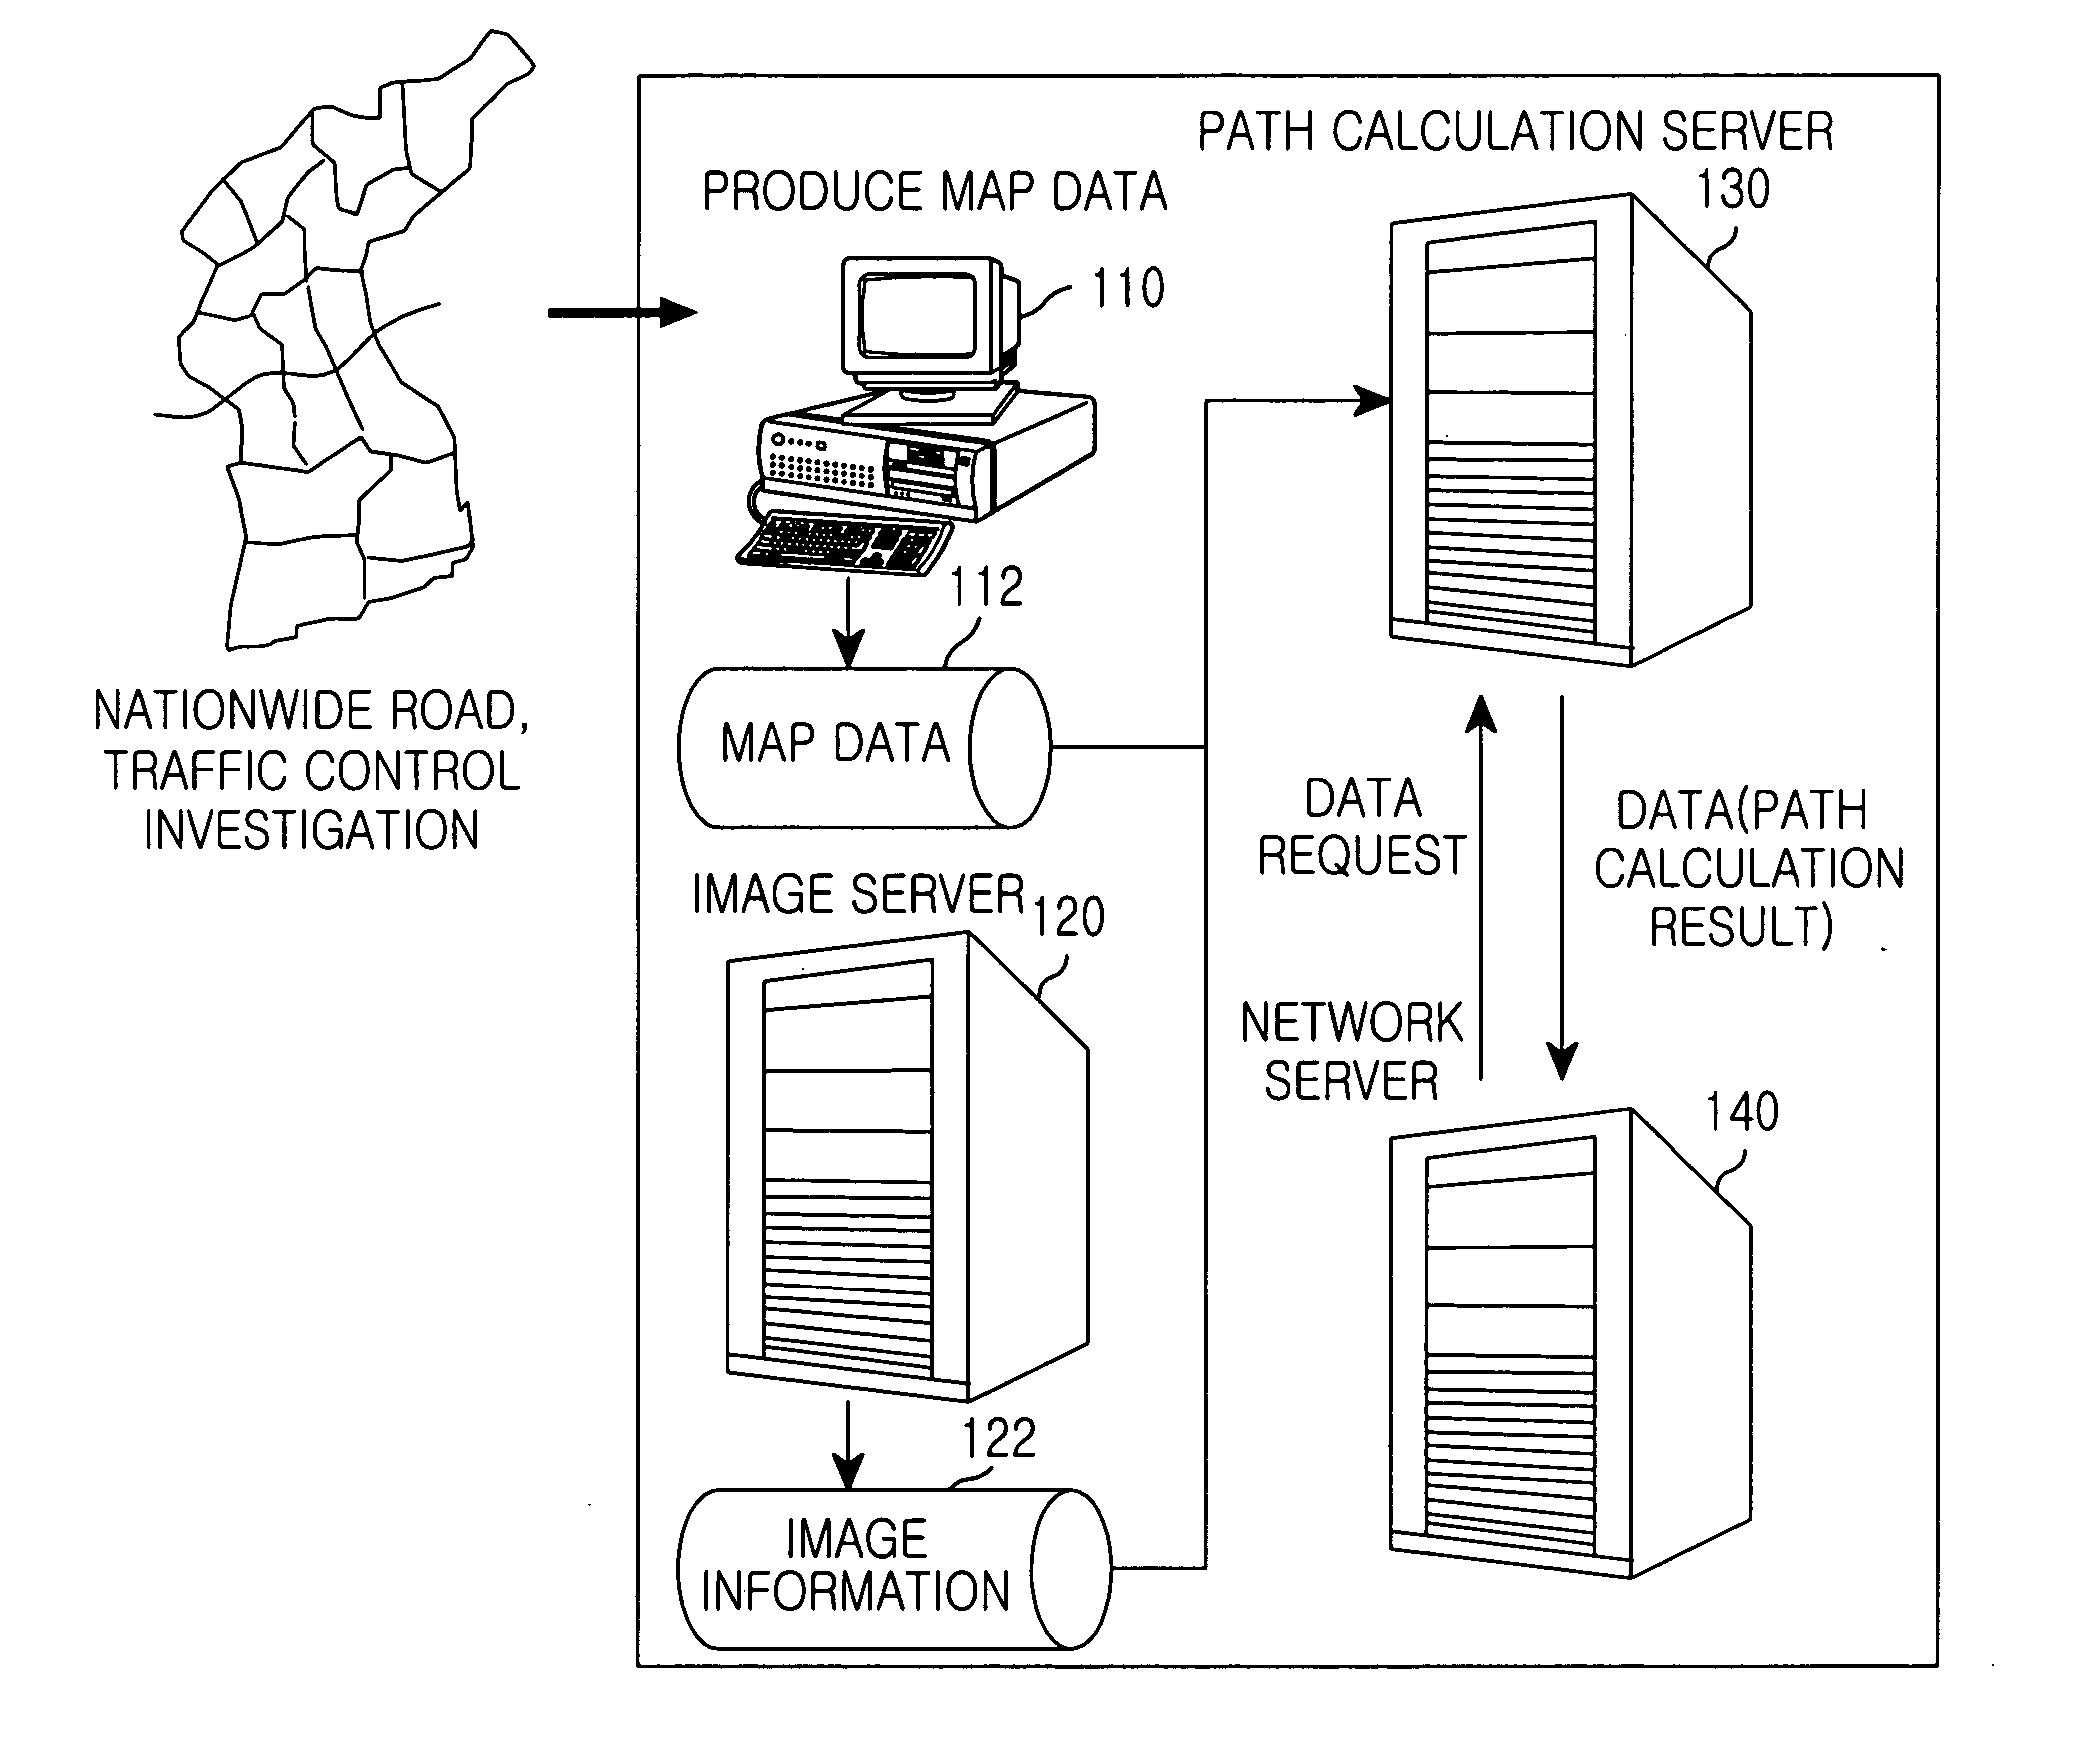 Apparatus and method for downloading and displaying images relating to global positioning information in a navigation system